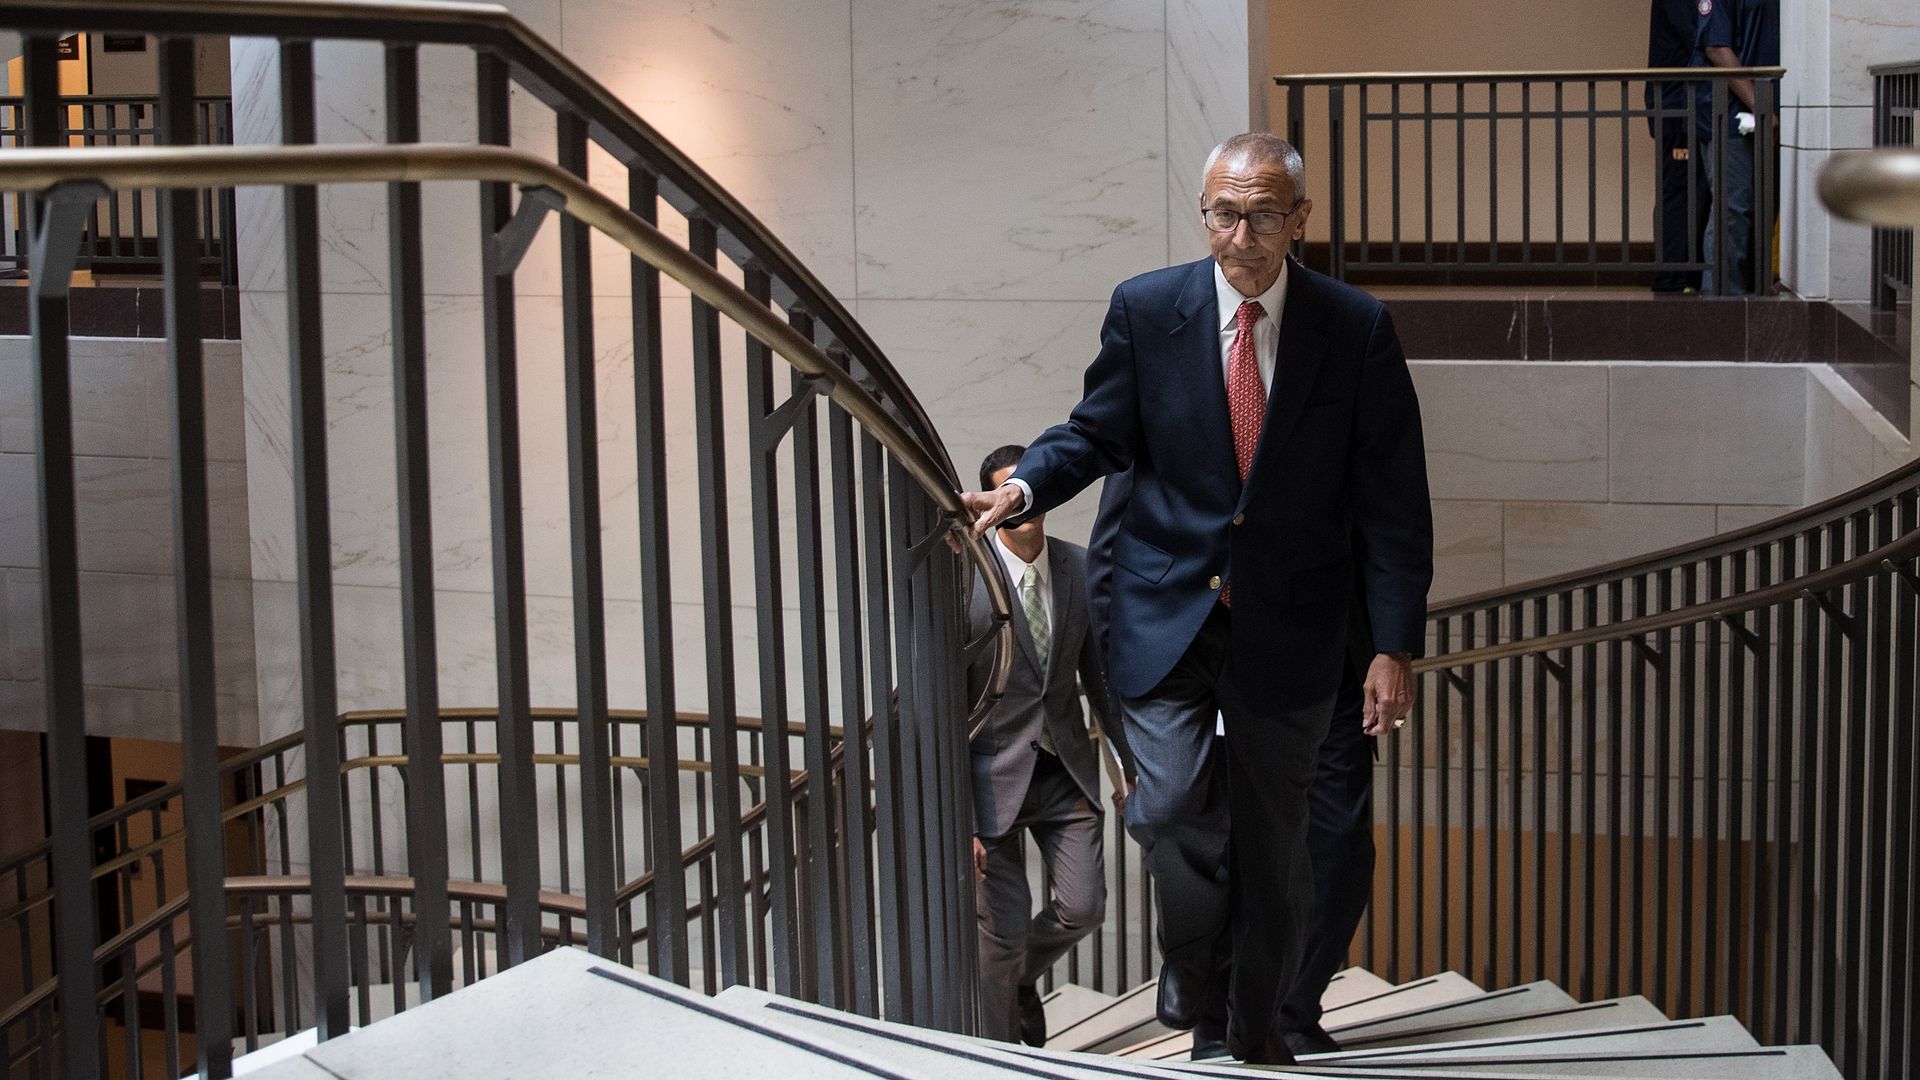 John Podesta is seen climbing a set of stairs in the Capitol Visitors Center.